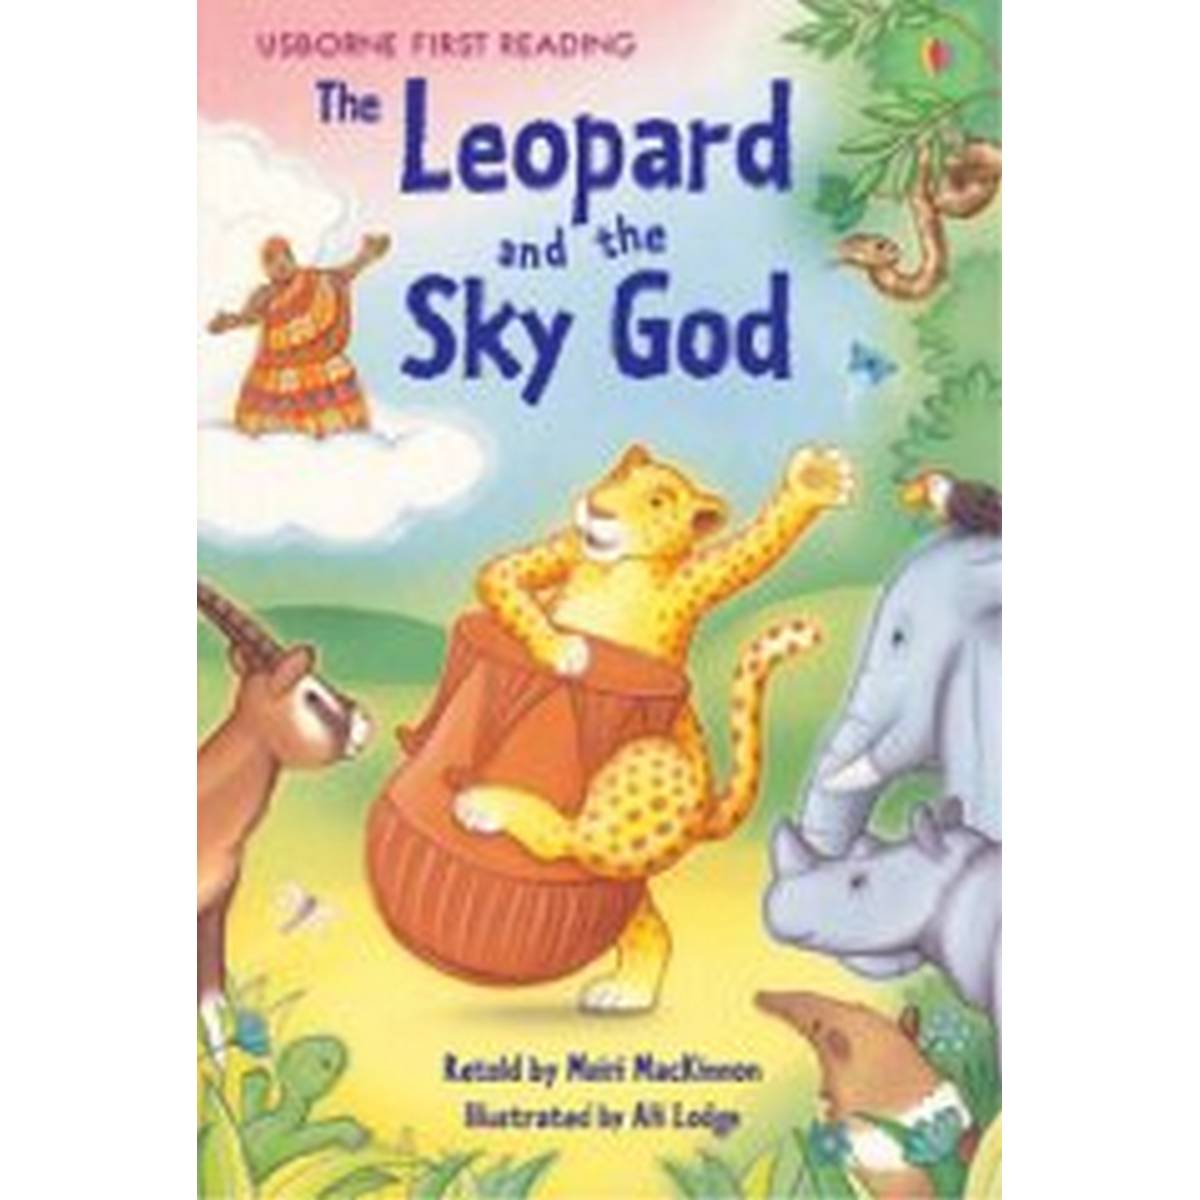 The Leopard and the Sky God (First Reading Level 3)